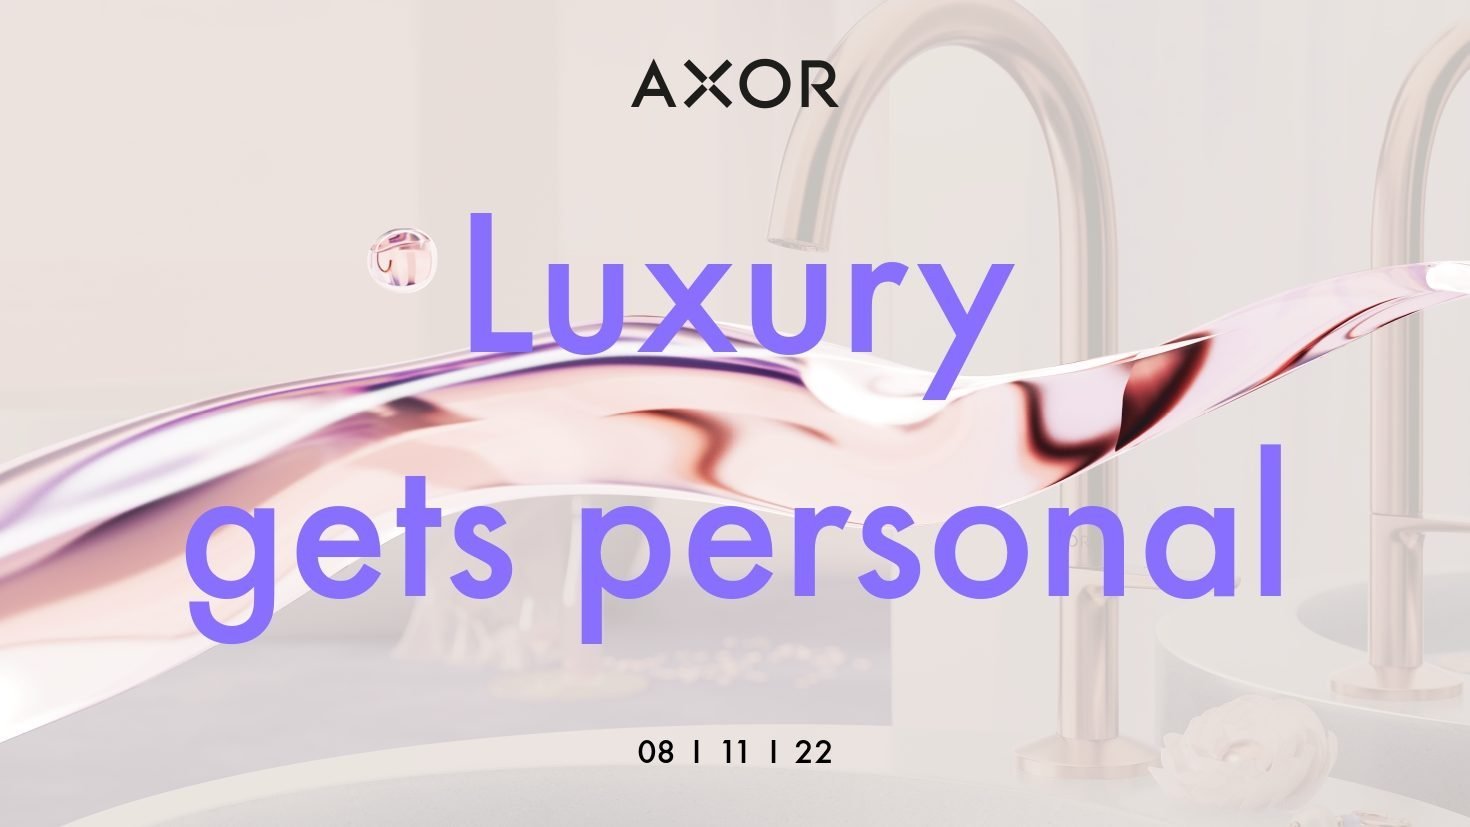 AXOR Luxury Gets Personal